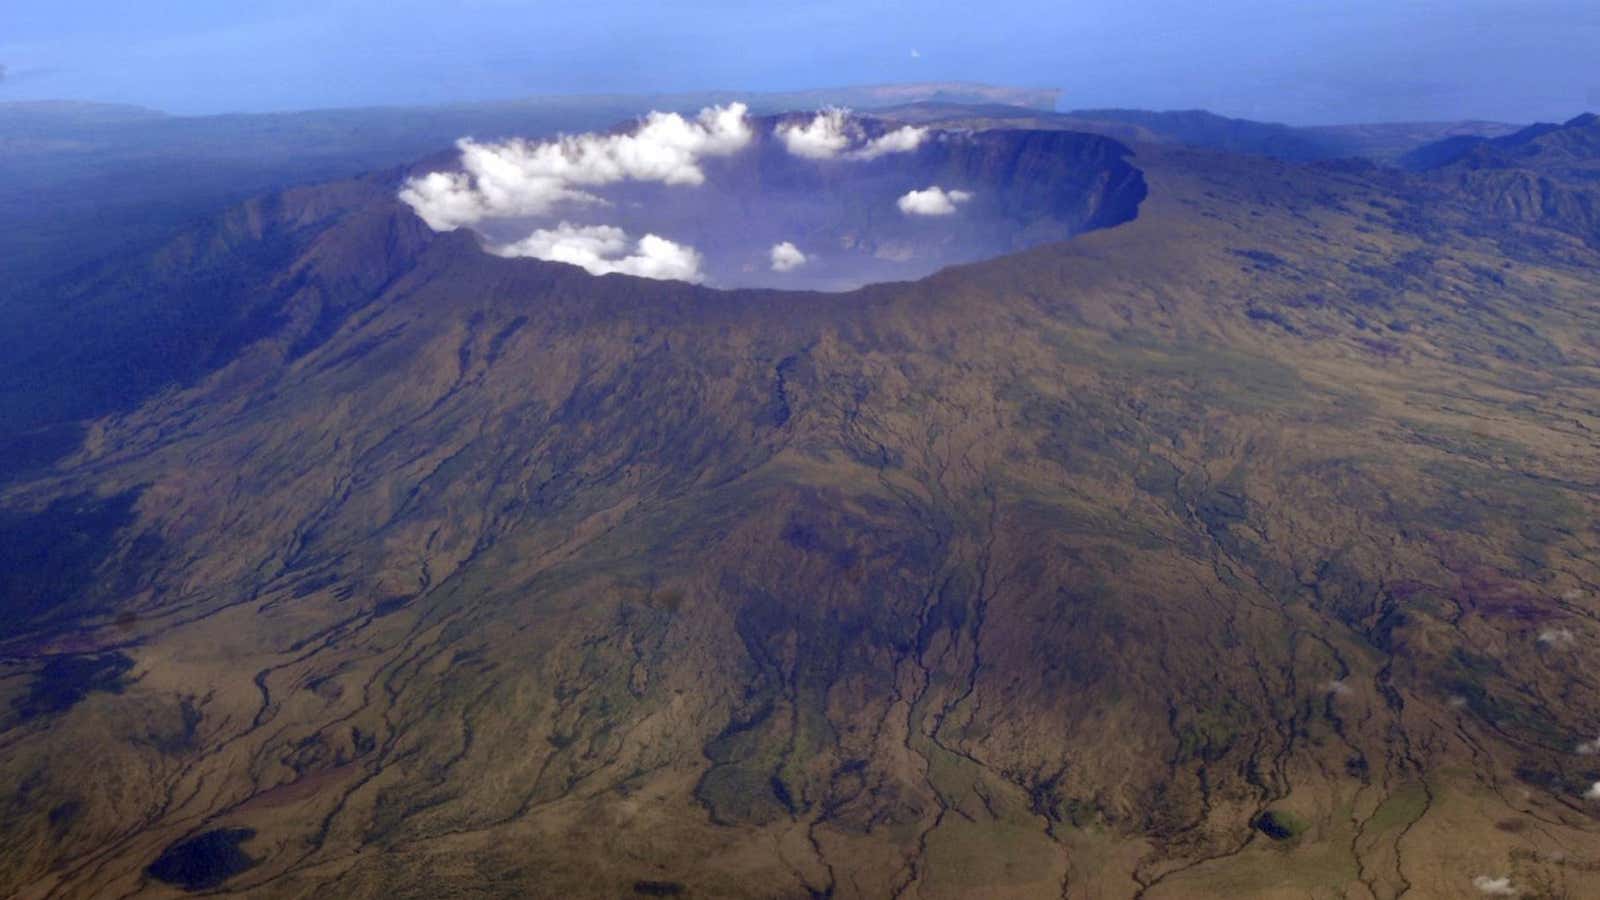 The 7-mile-wide crater left on top of Mount Tambora in Indonesia after its volcanic eruption in 1815.